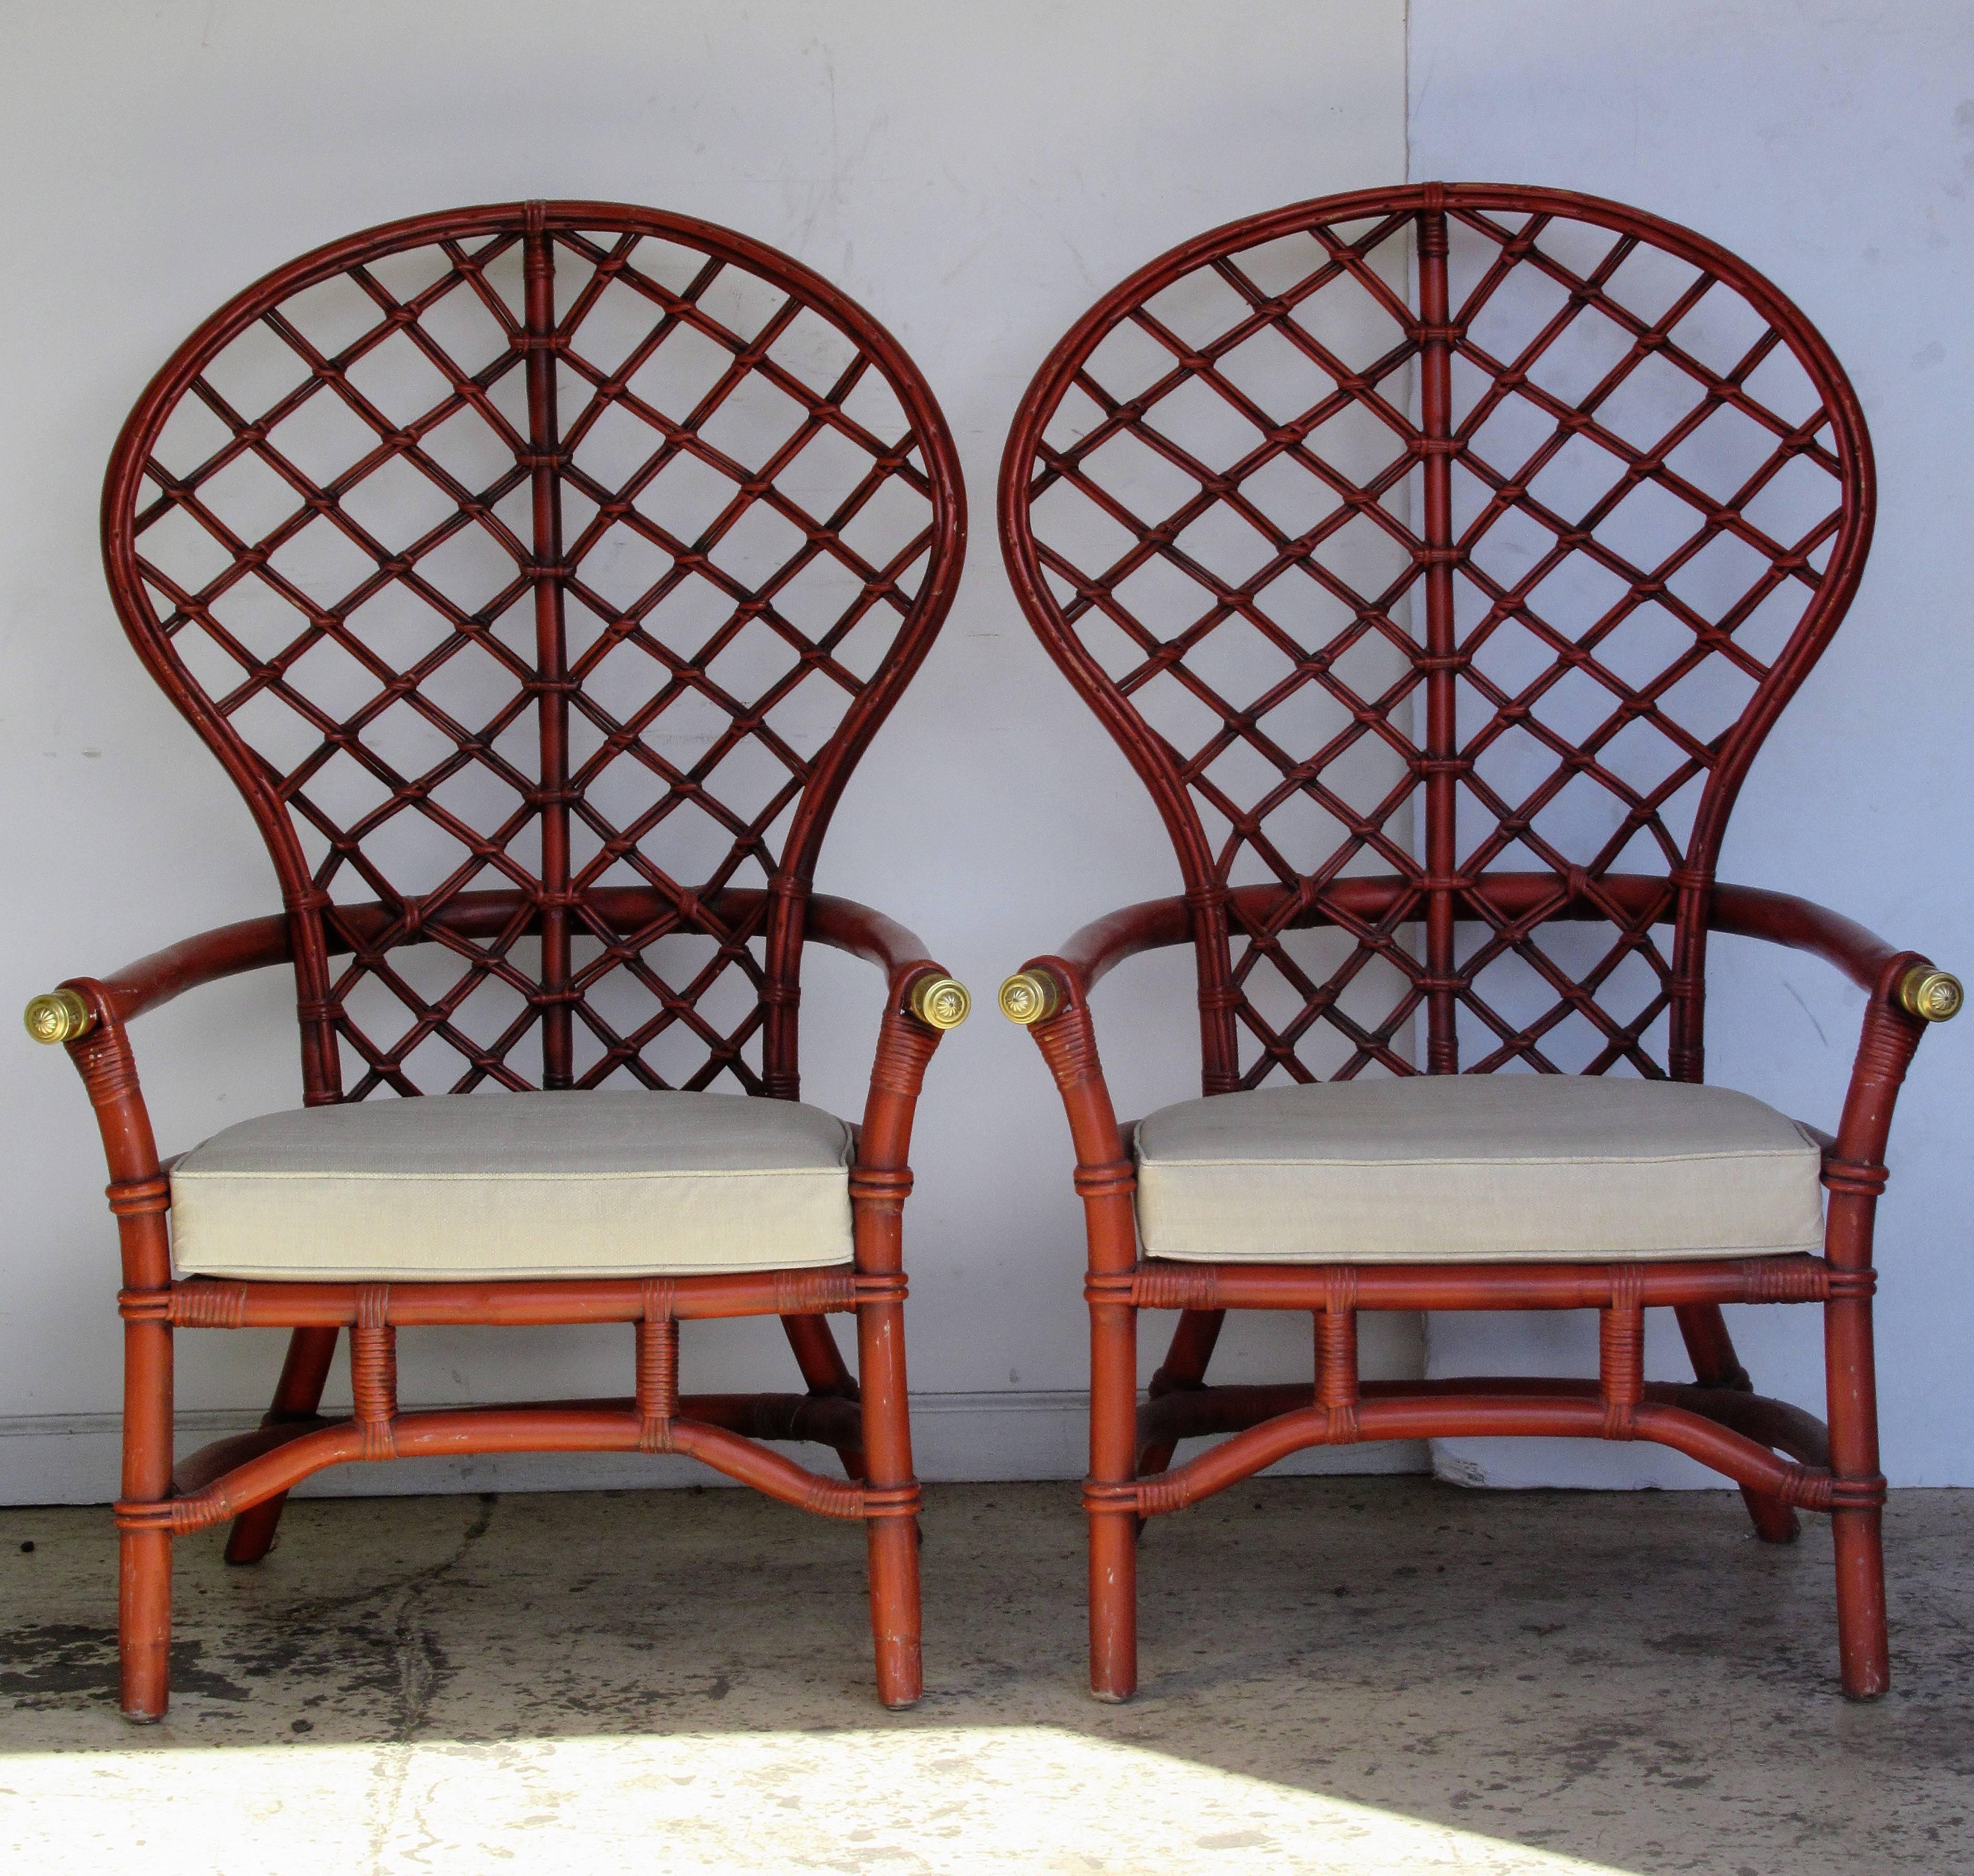 A pair of large-scale tall balloon back rattan armchairs fitted with decorative brass caps on arm ends. Both chairs in the most beautiful original glowing Chinese red stain painted finish. In the style Jean Royere / Chinese Chippendale, circa 1960.